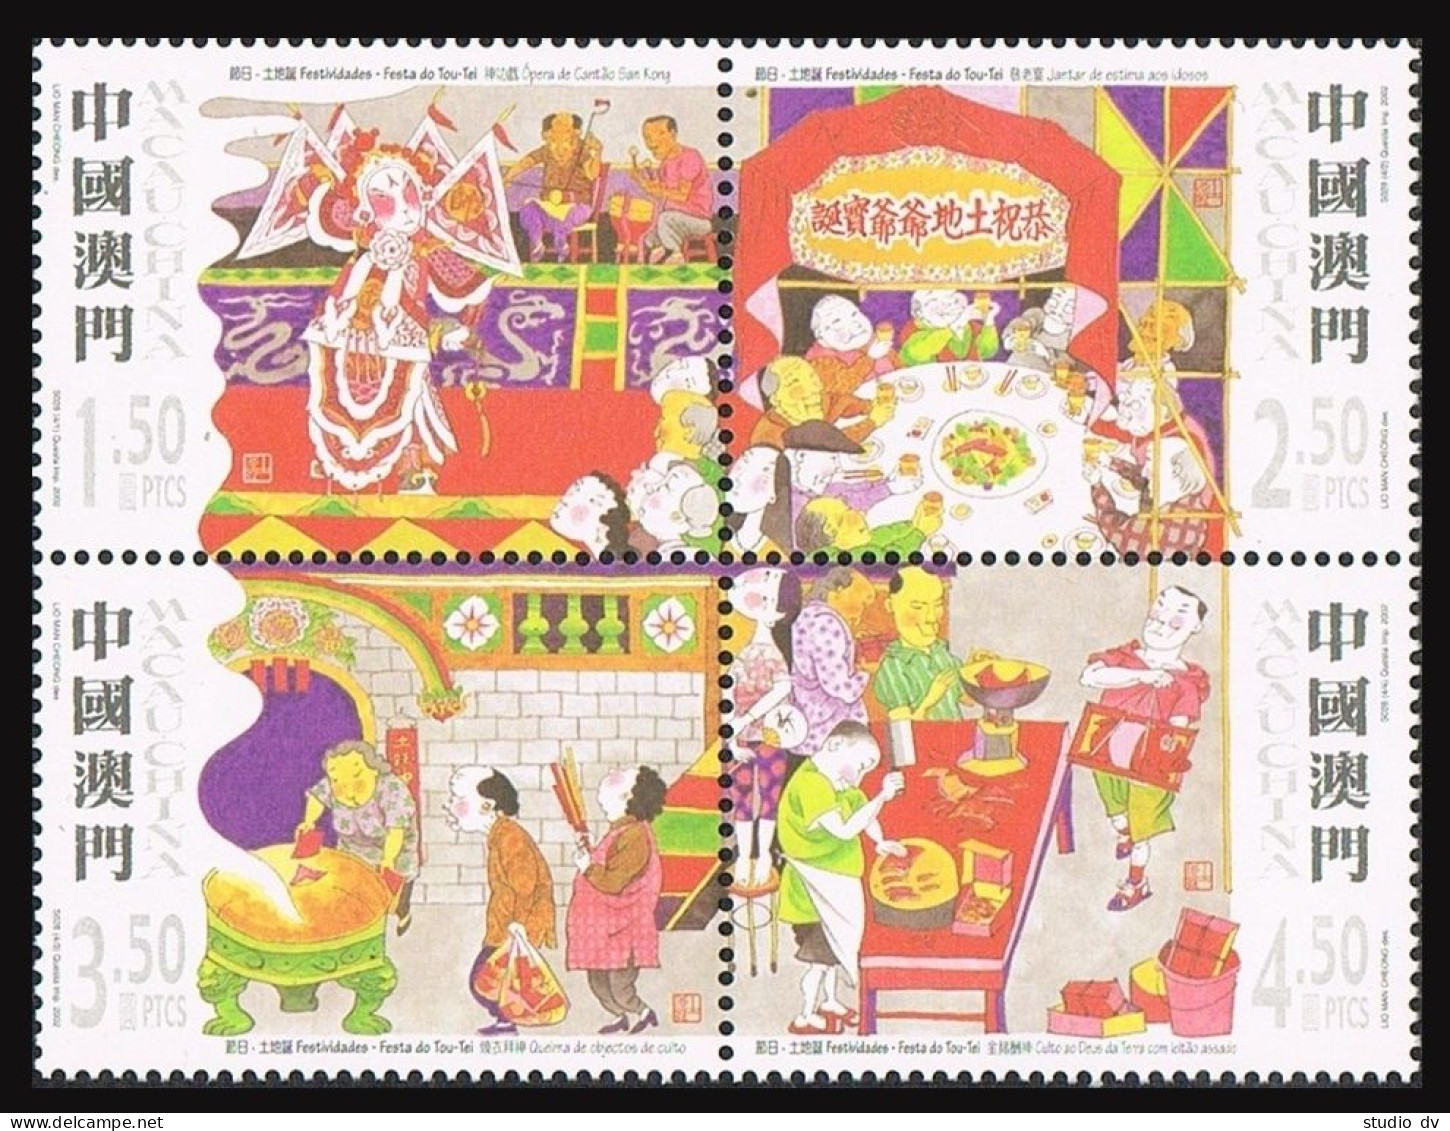 Macao 1086 Af Block,MNH. Tou-tei Festival, 2002.Opera,Dinner,Religious Objects, - Nuevos